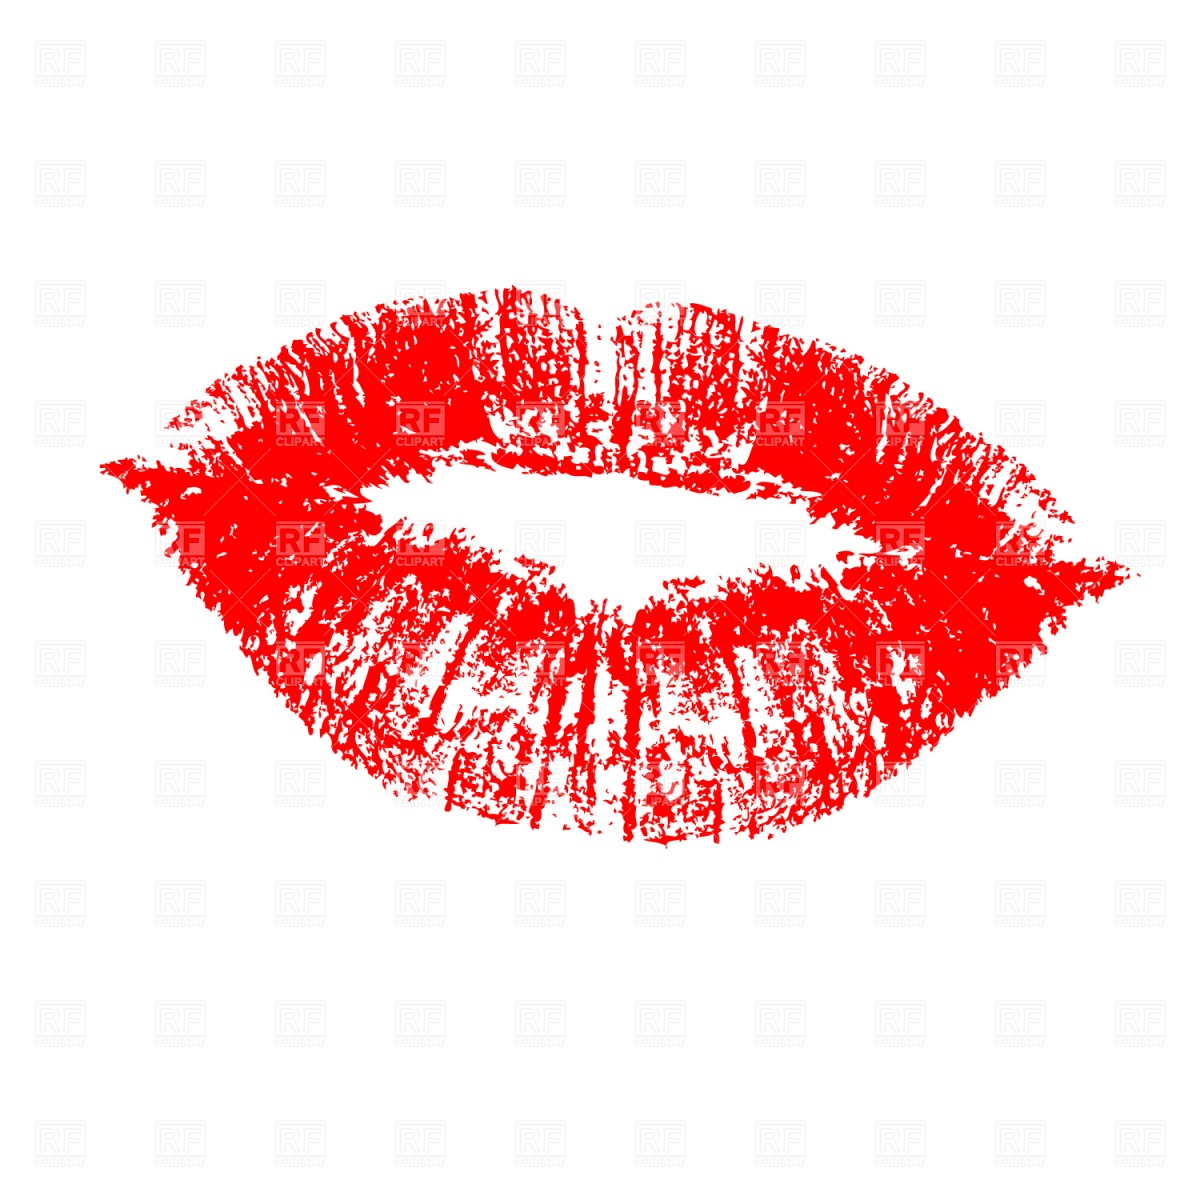 Woman Lips Imprint Download Royalty Free Vector Clipart  Eps